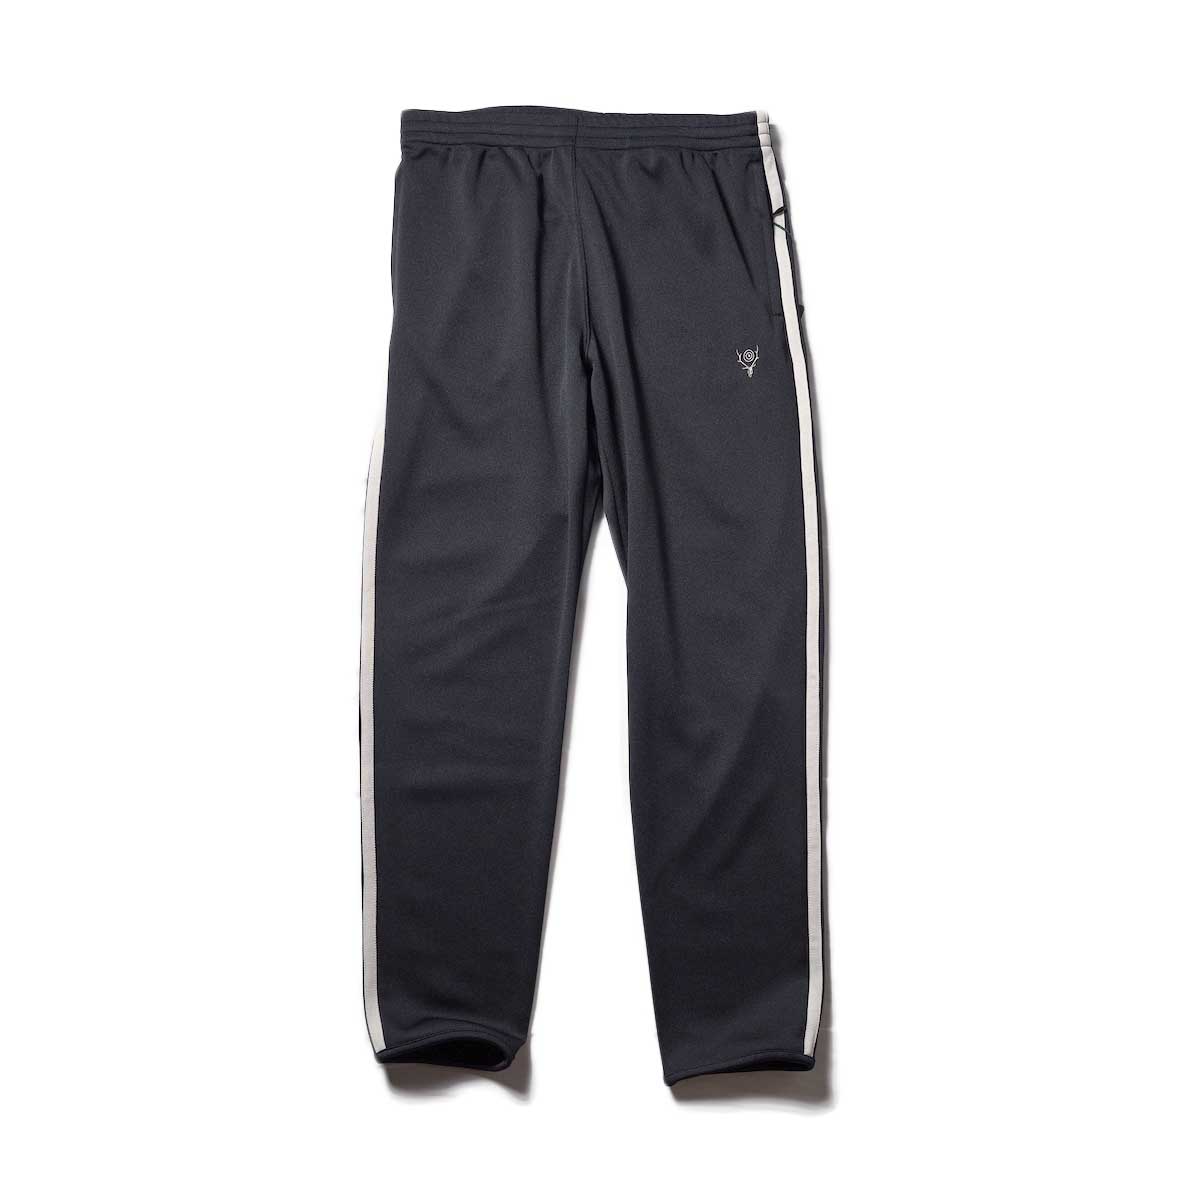 South2 West8 / Trainer Pant - Poly Smooth (Black)